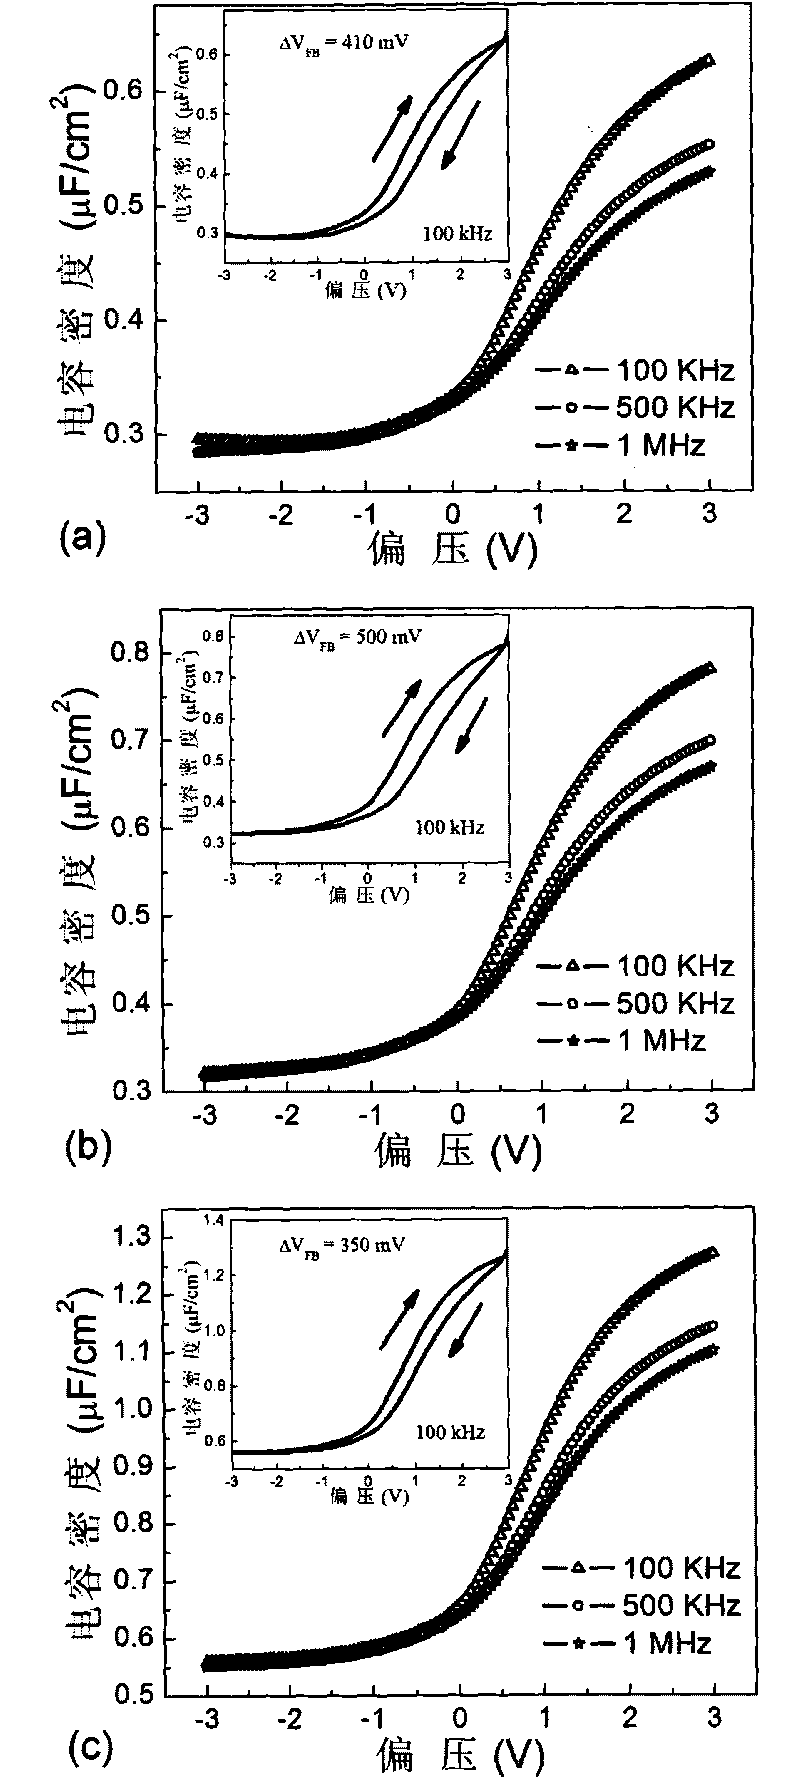 Atomic layer deposition Al2O3/HfO2 method for regulating energy band offset between GaAs semiconductor and gate dielectric